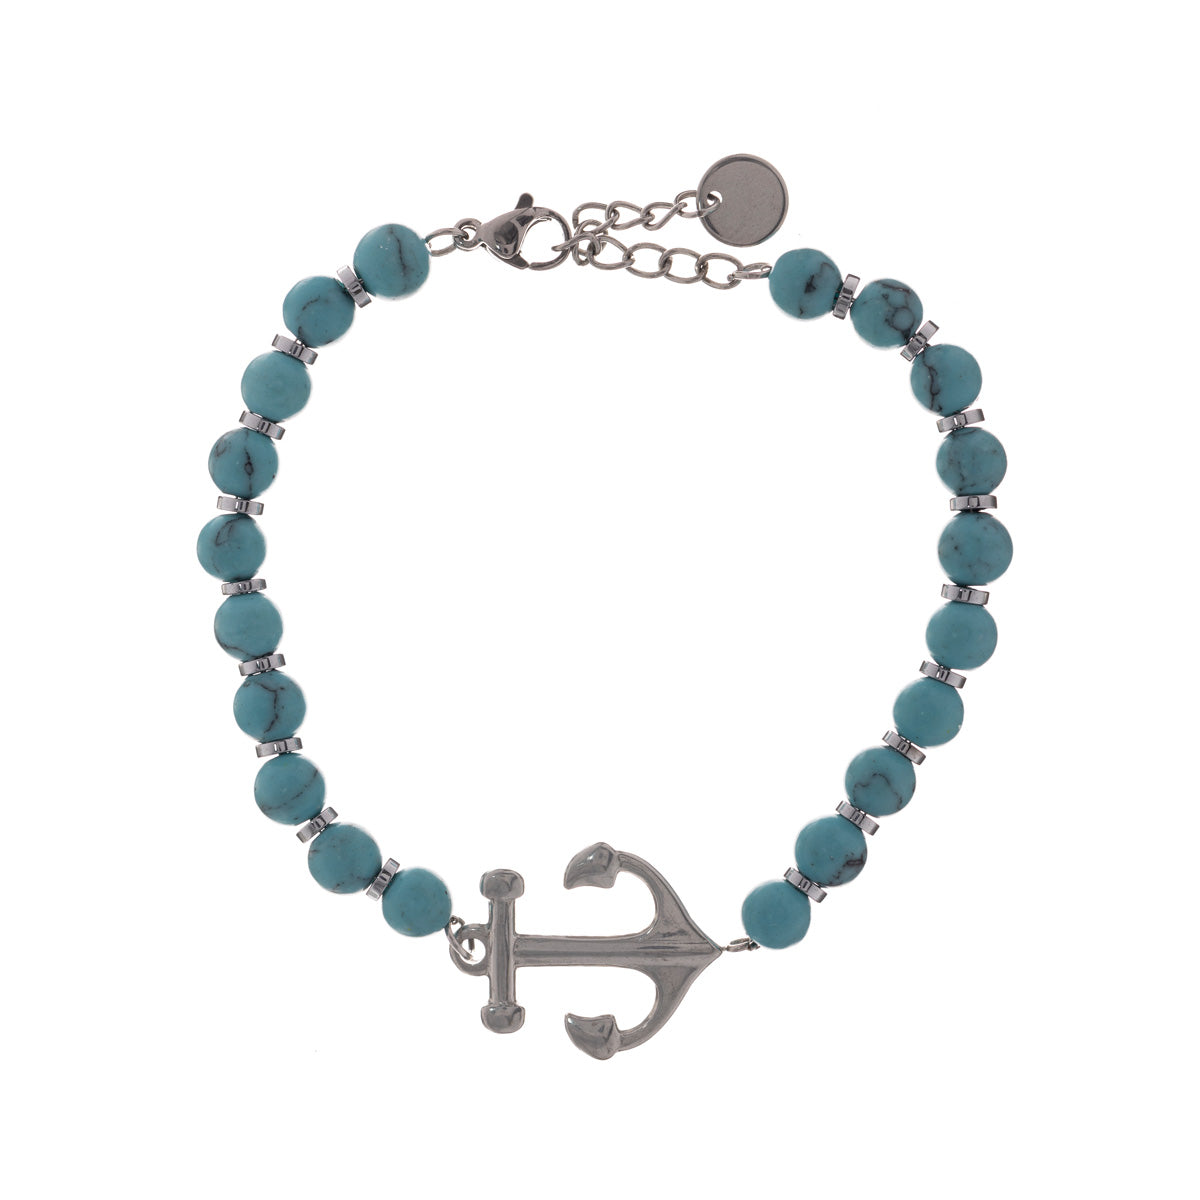 Steel bead bracelet with anchor